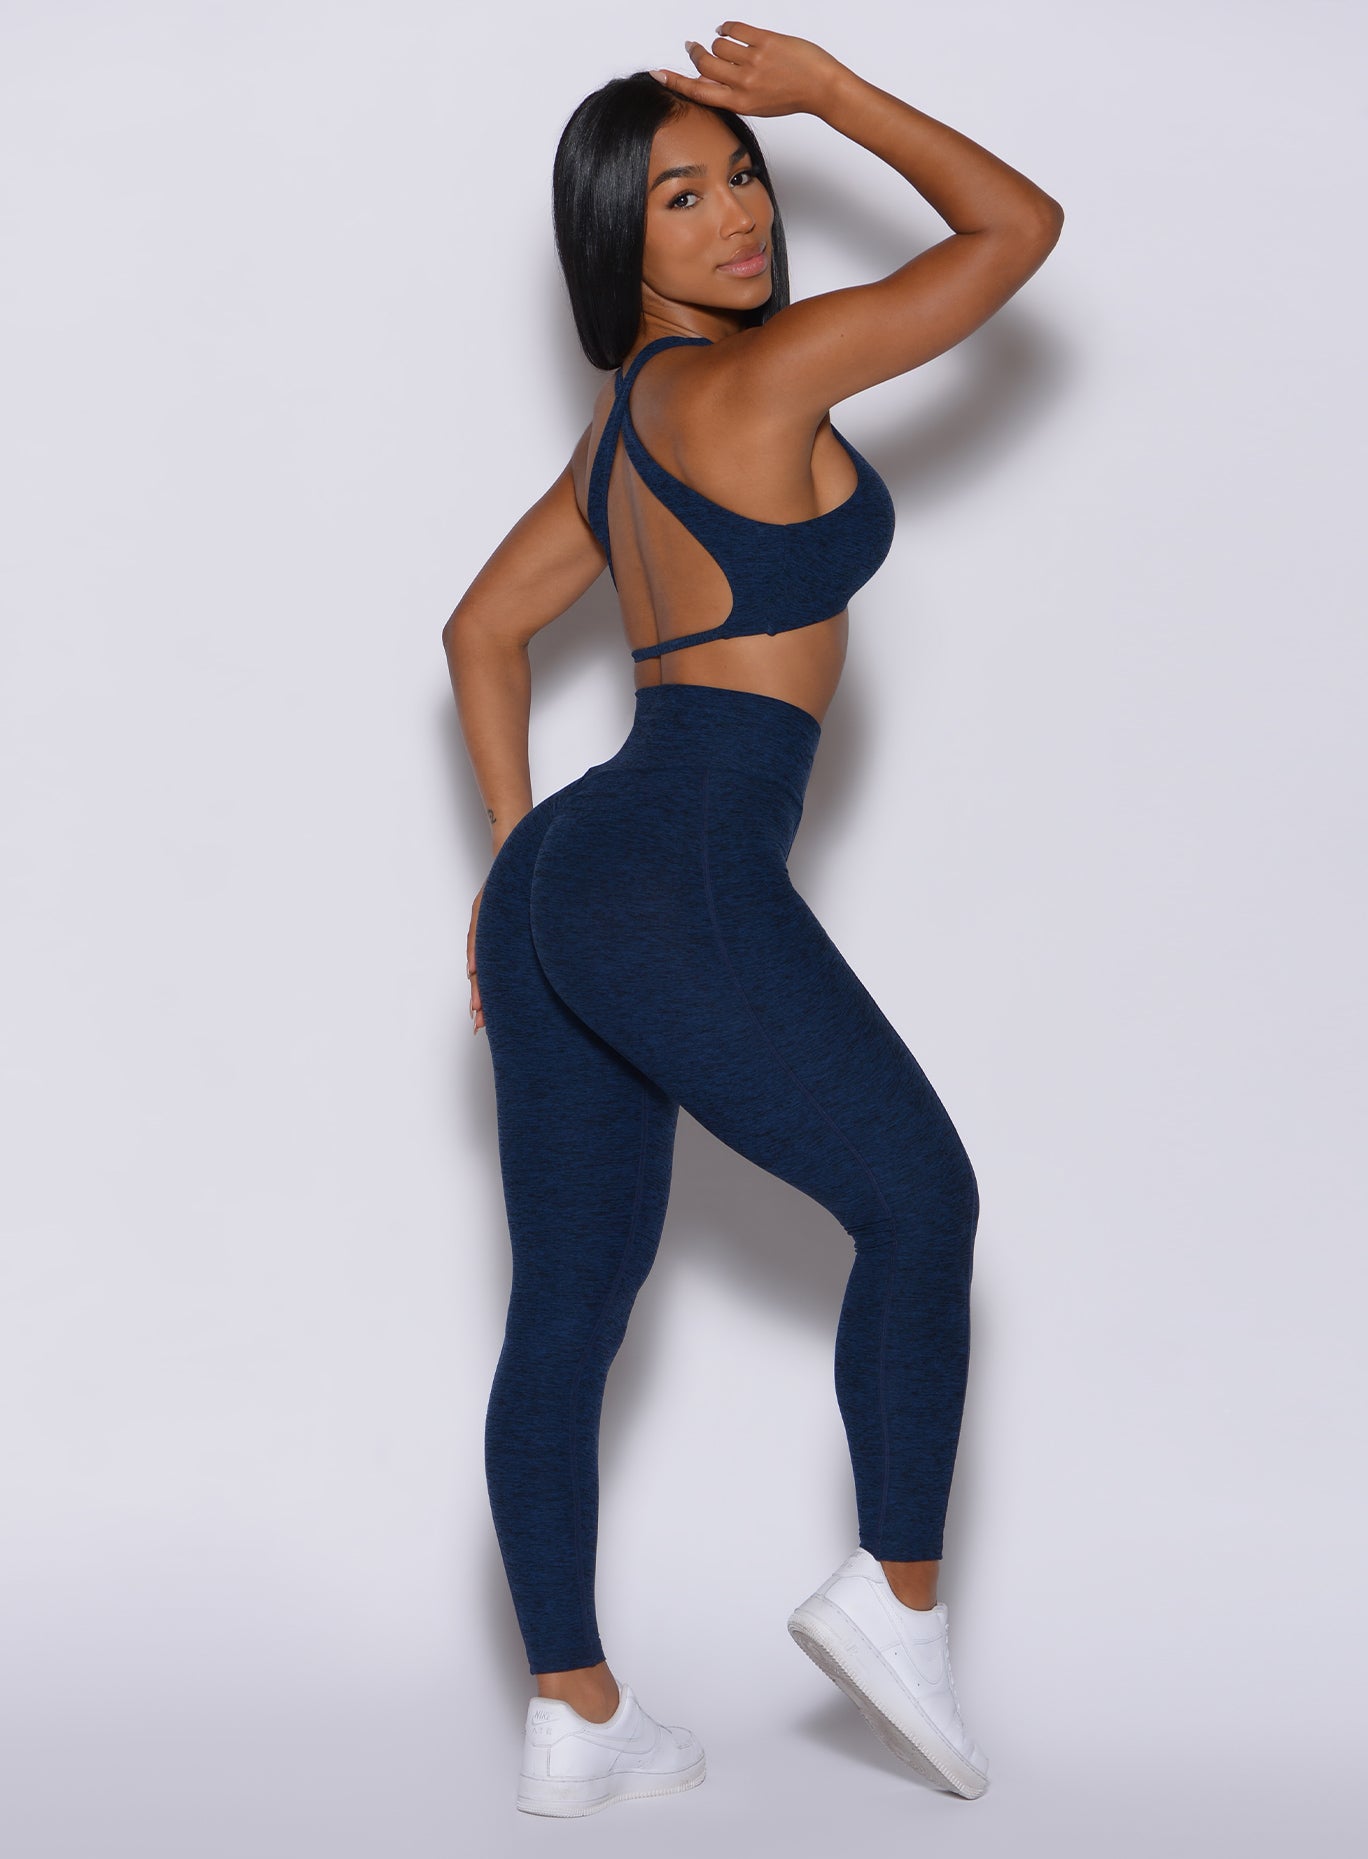 Right  profile view of a model in our Brazilian Contour Leggings in sapphire blue color and a matching ace sports bra